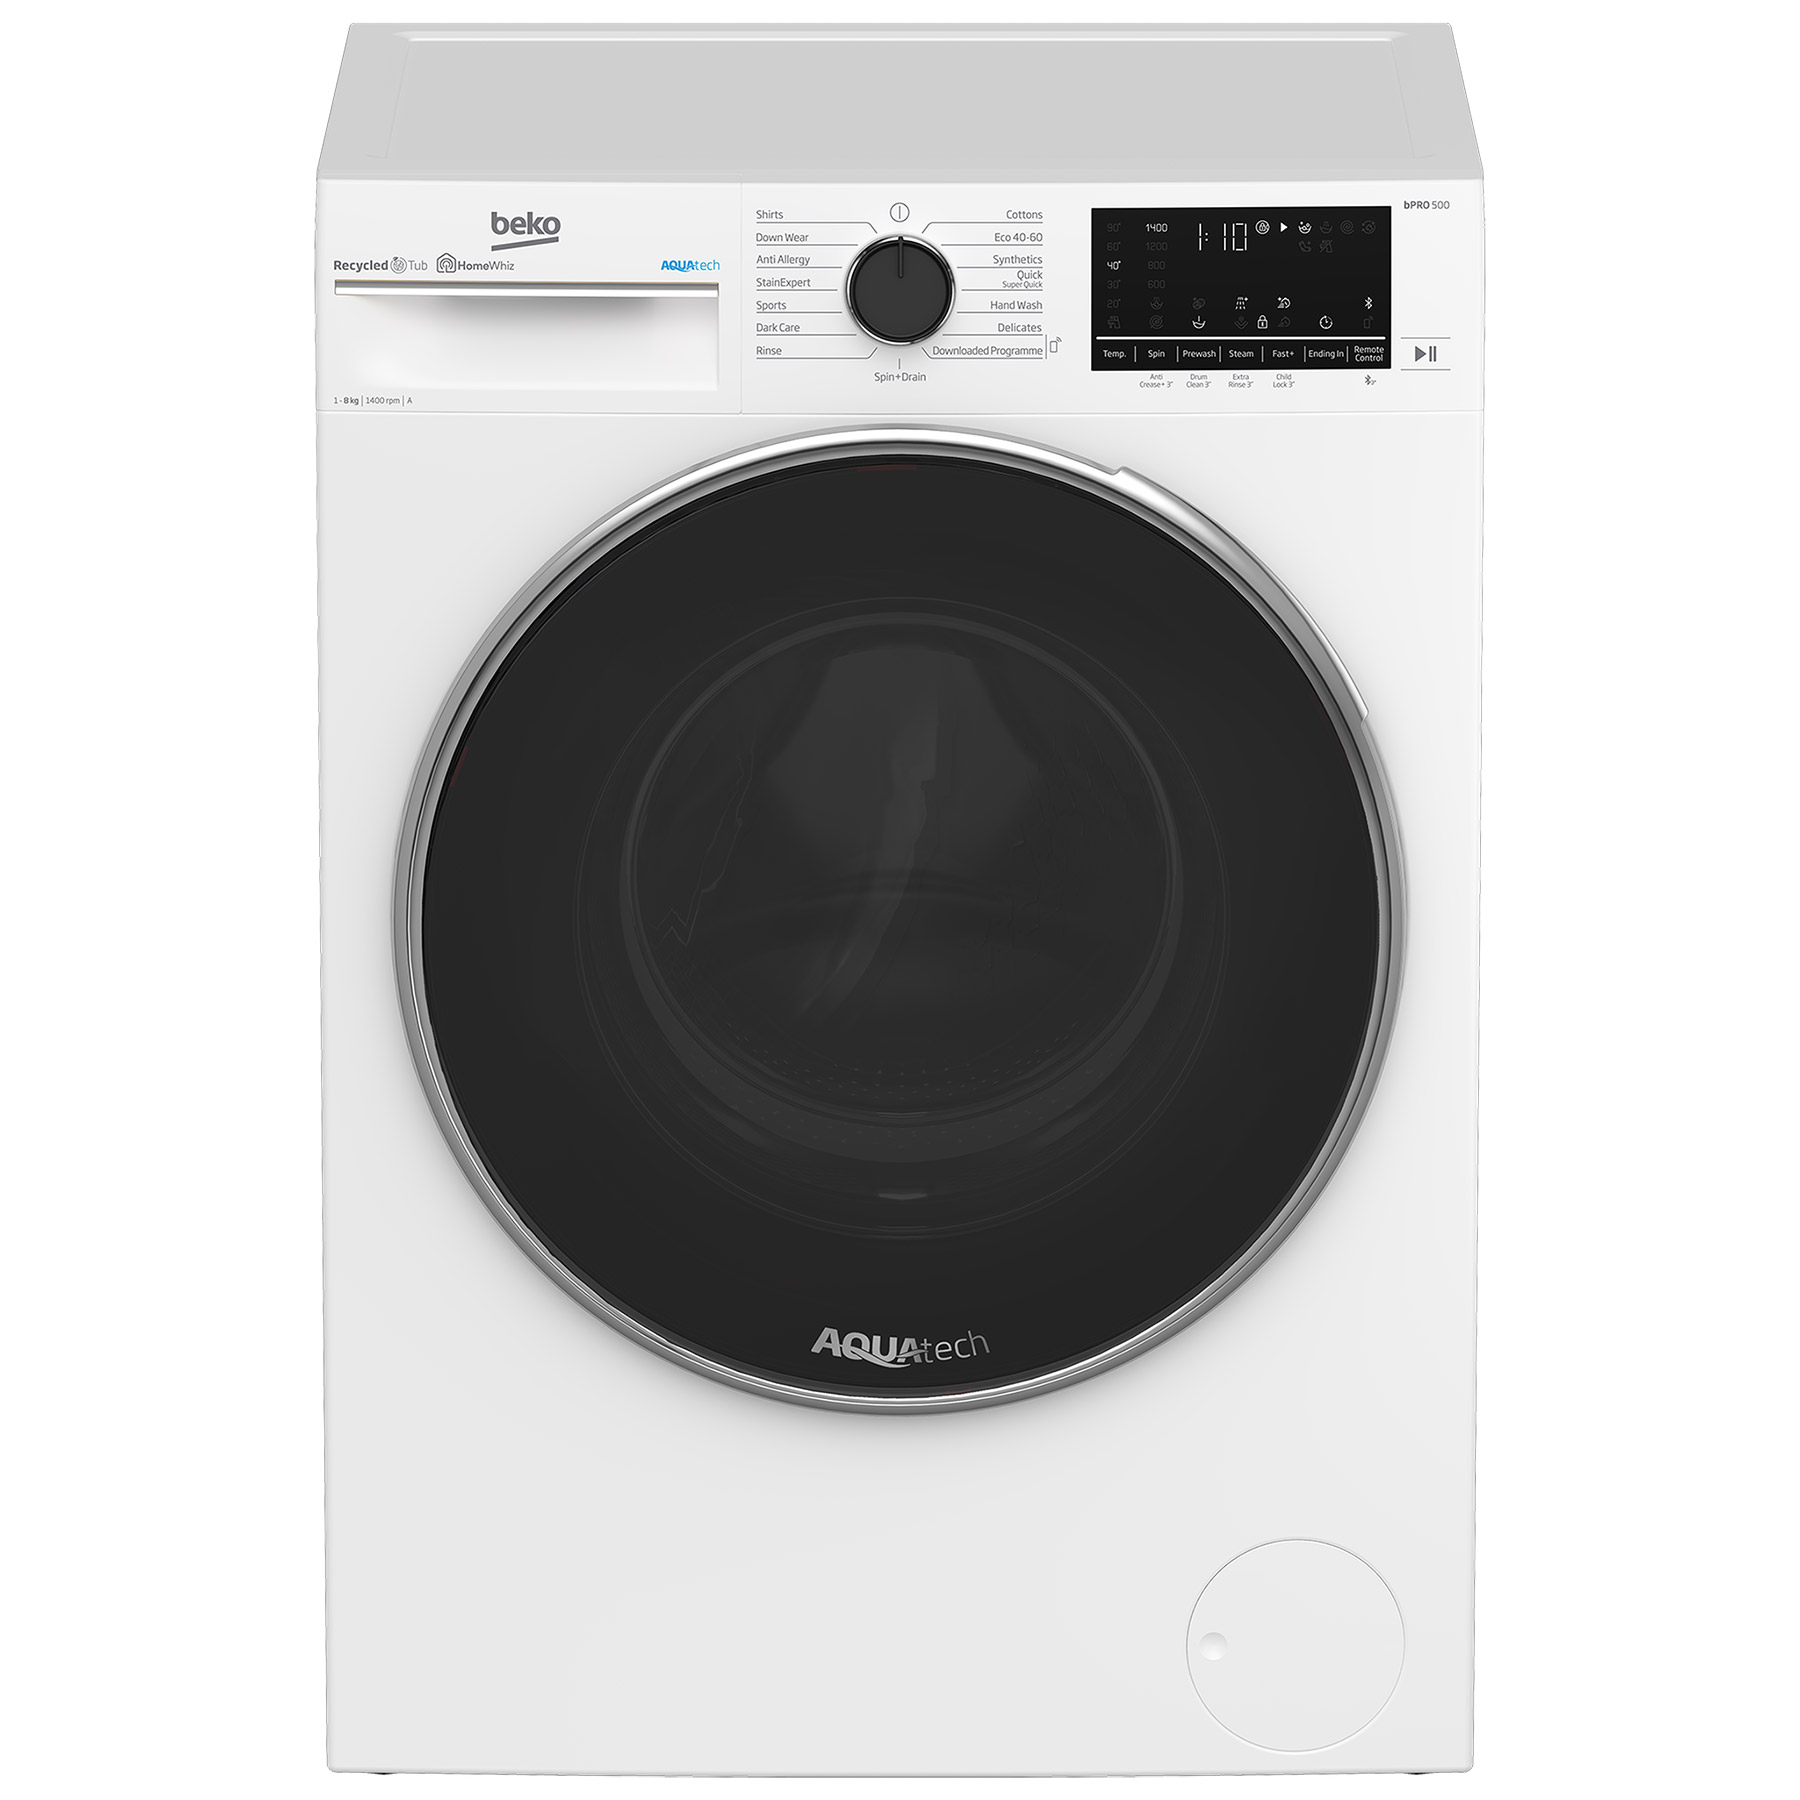 Image of Beko B5W58410AW Washing Machine in White 1400rpm 8Kg A Rated